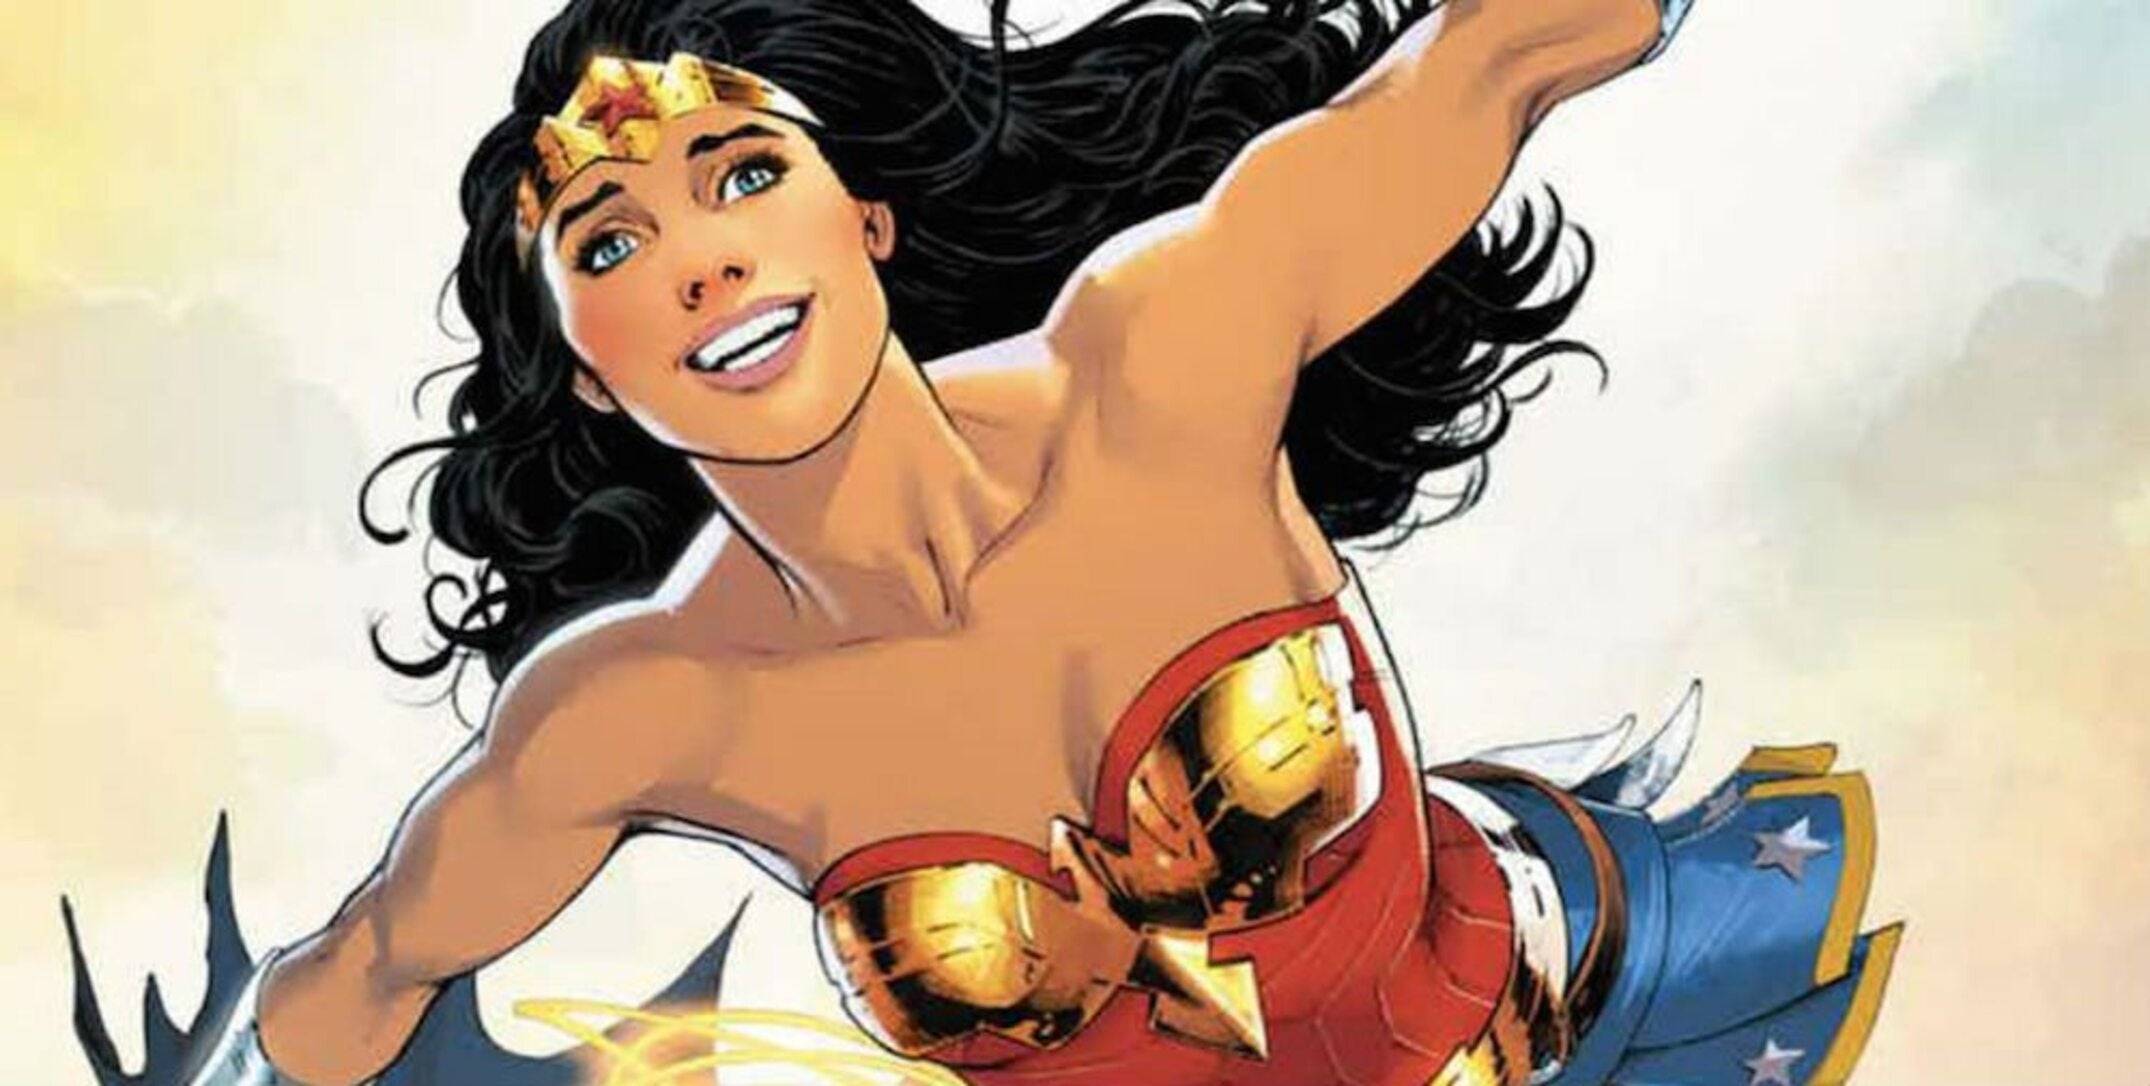 Wonder Woman smiling and flying